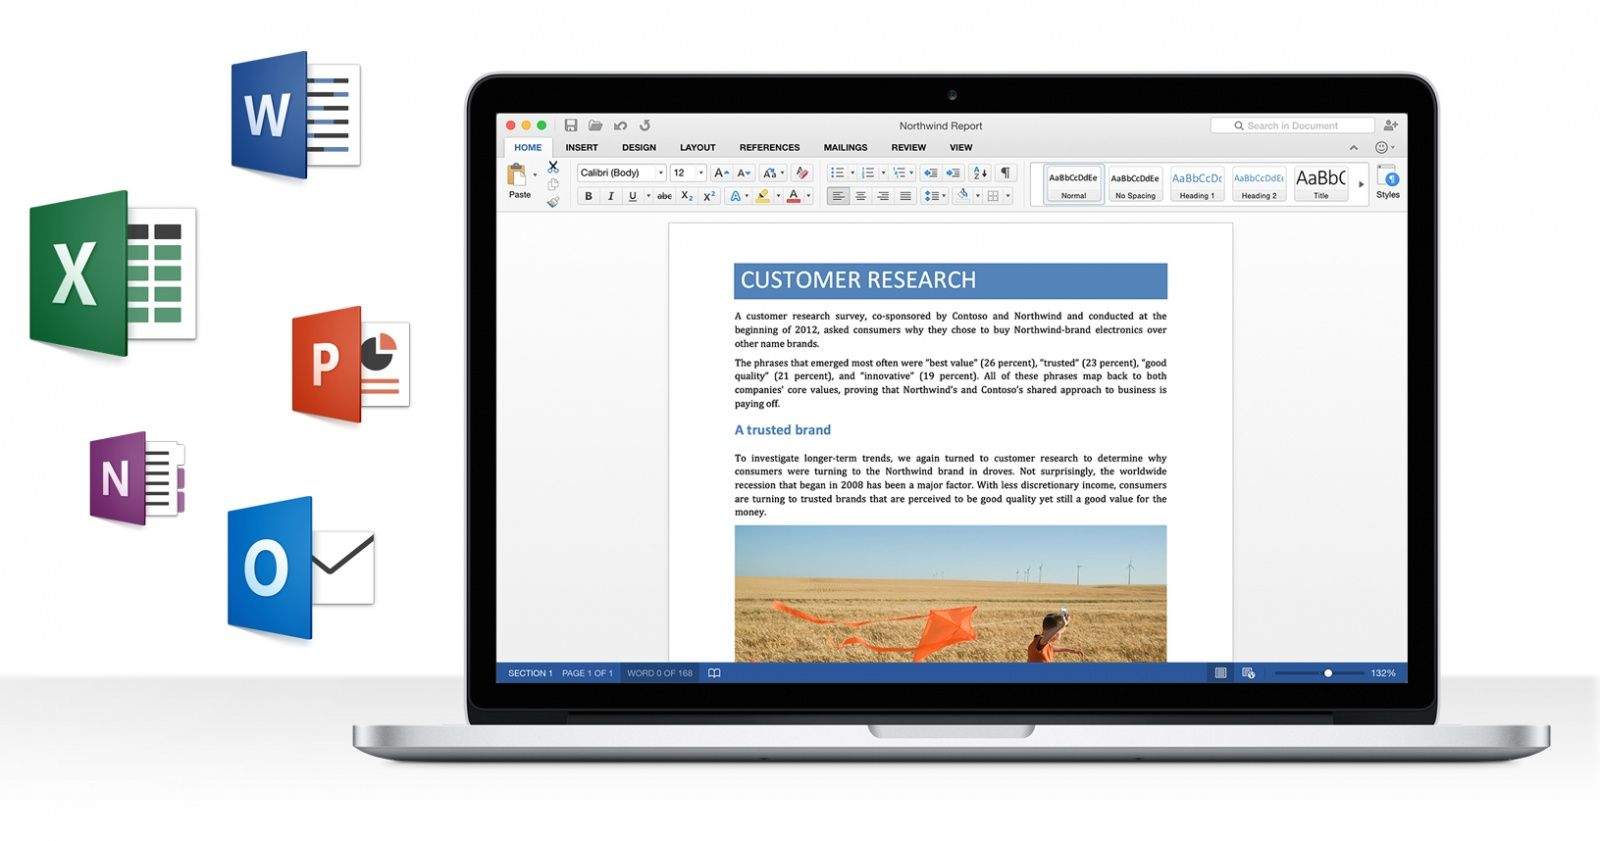 Microsoft office live meeting client for mac download